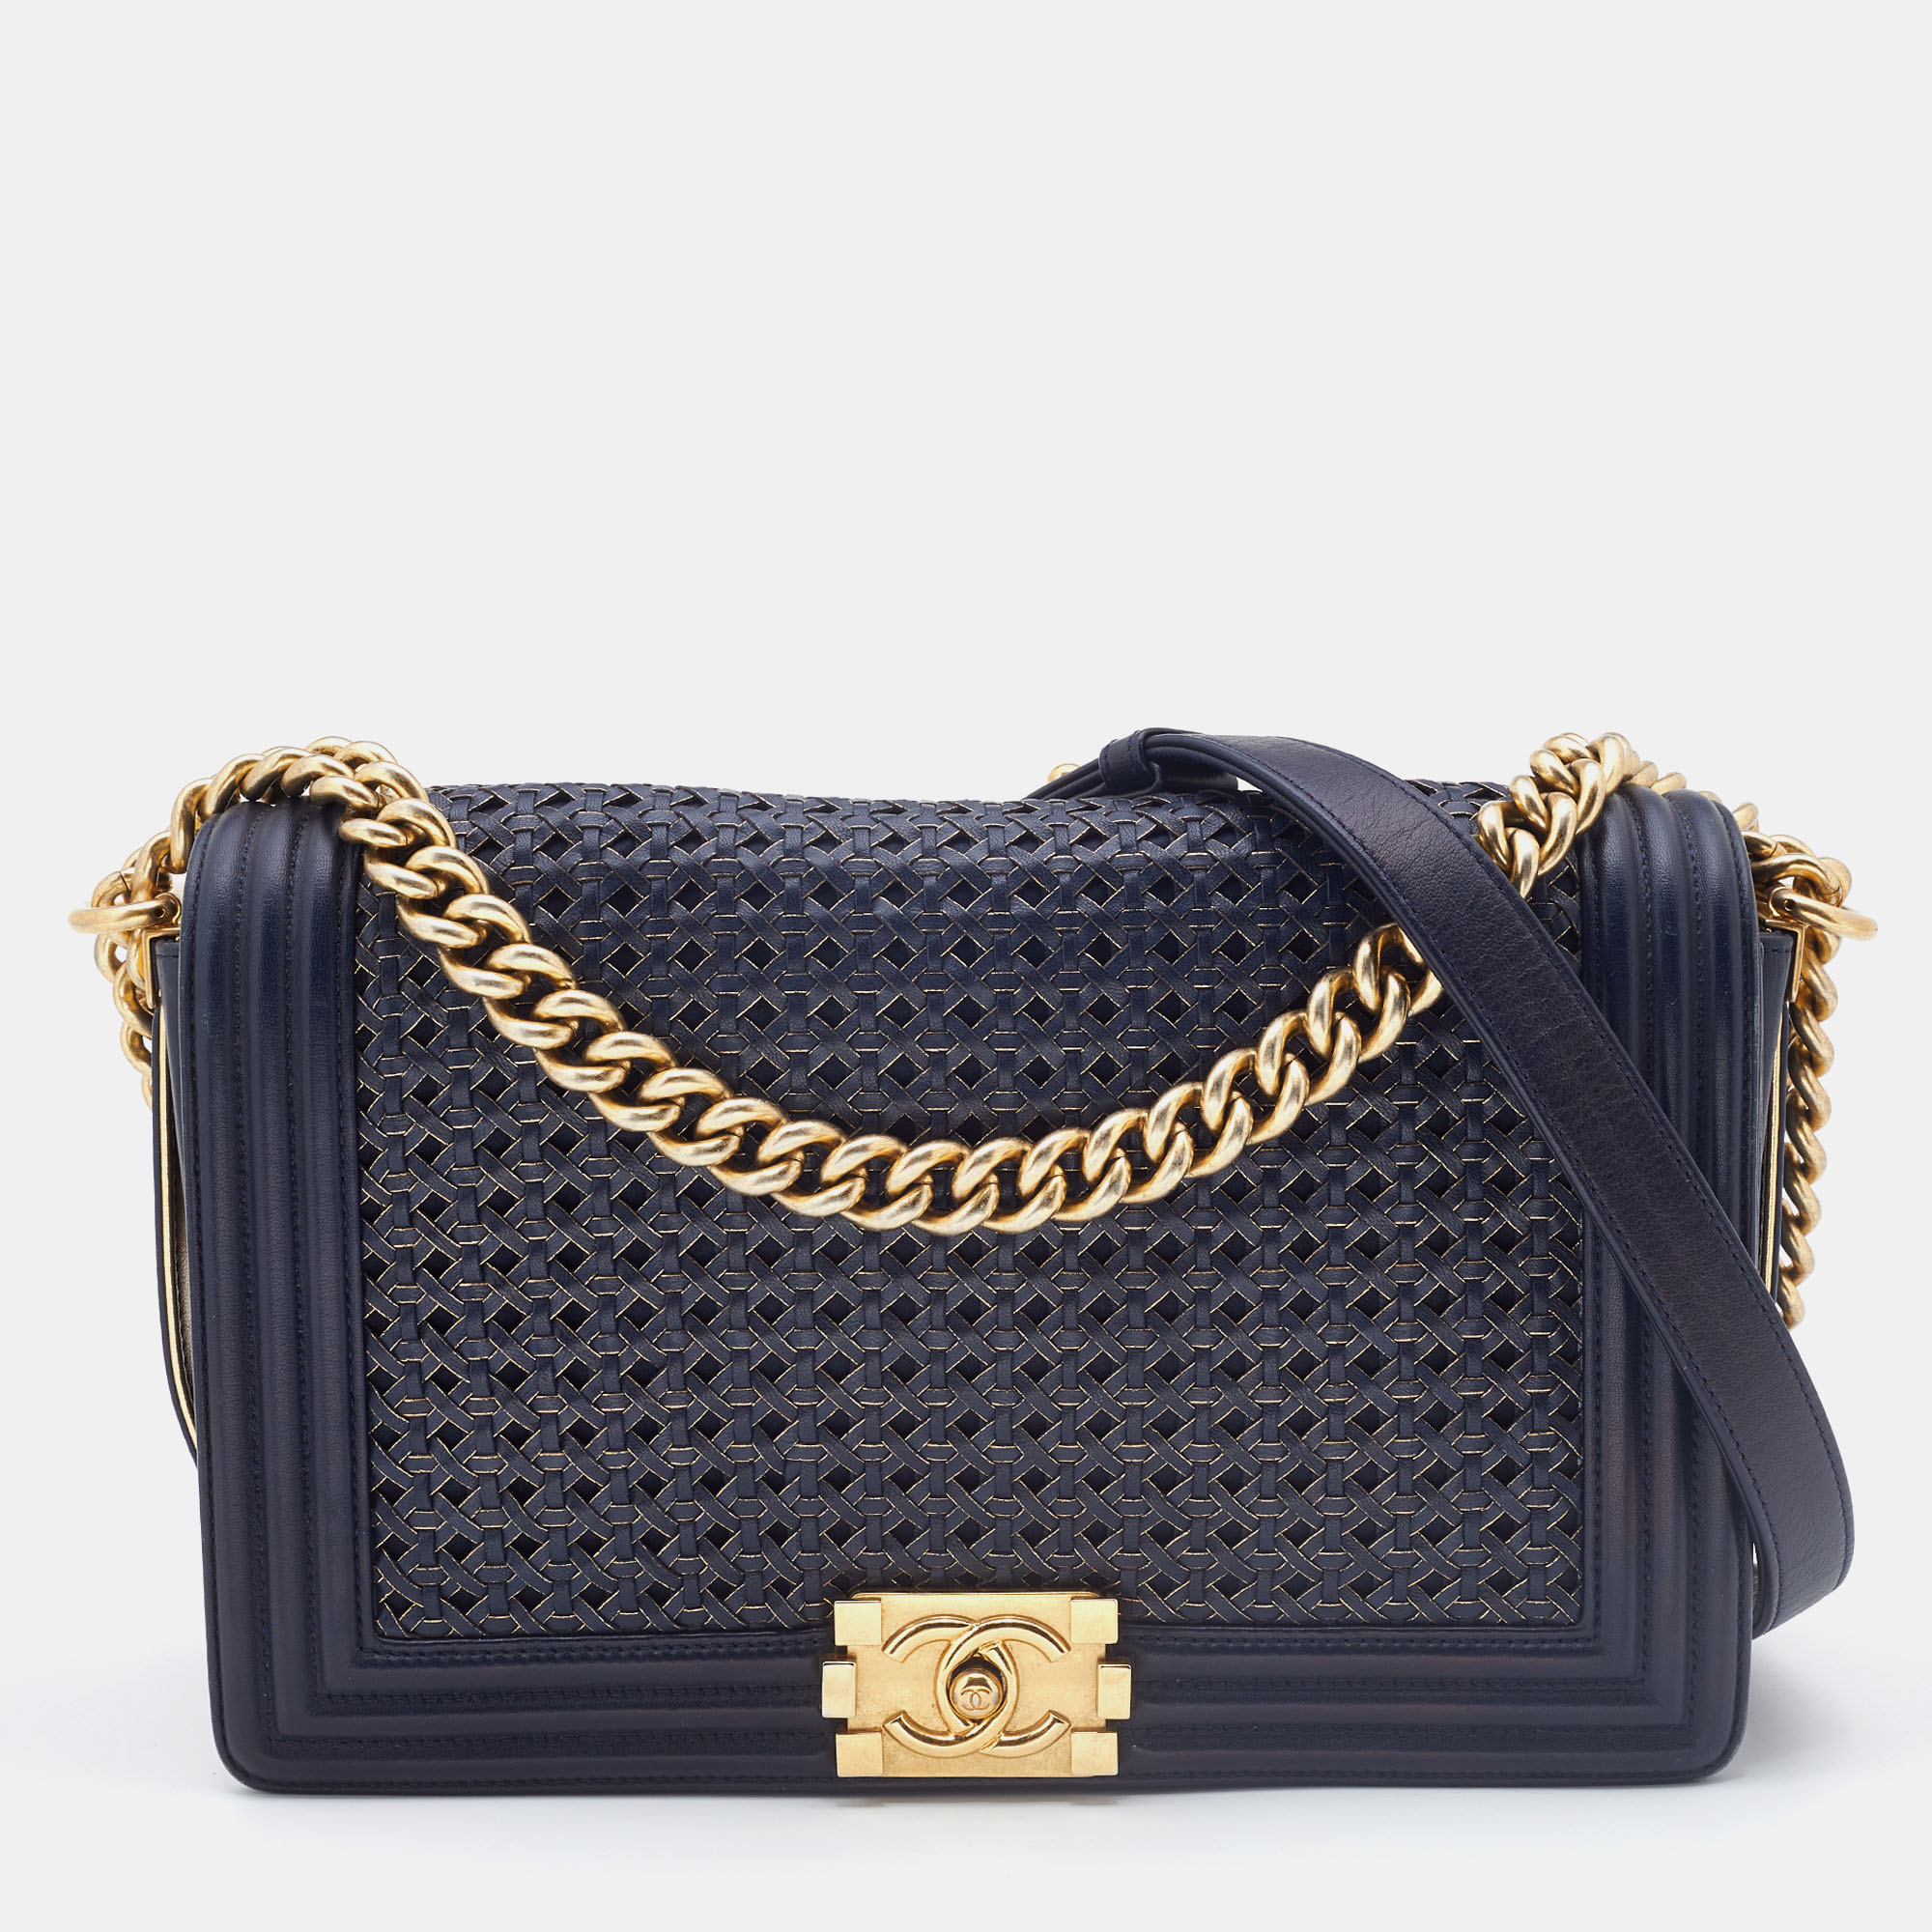 Pre-owned Chanel Navy Blue/gold Woven Leather New Medium Boy Bag